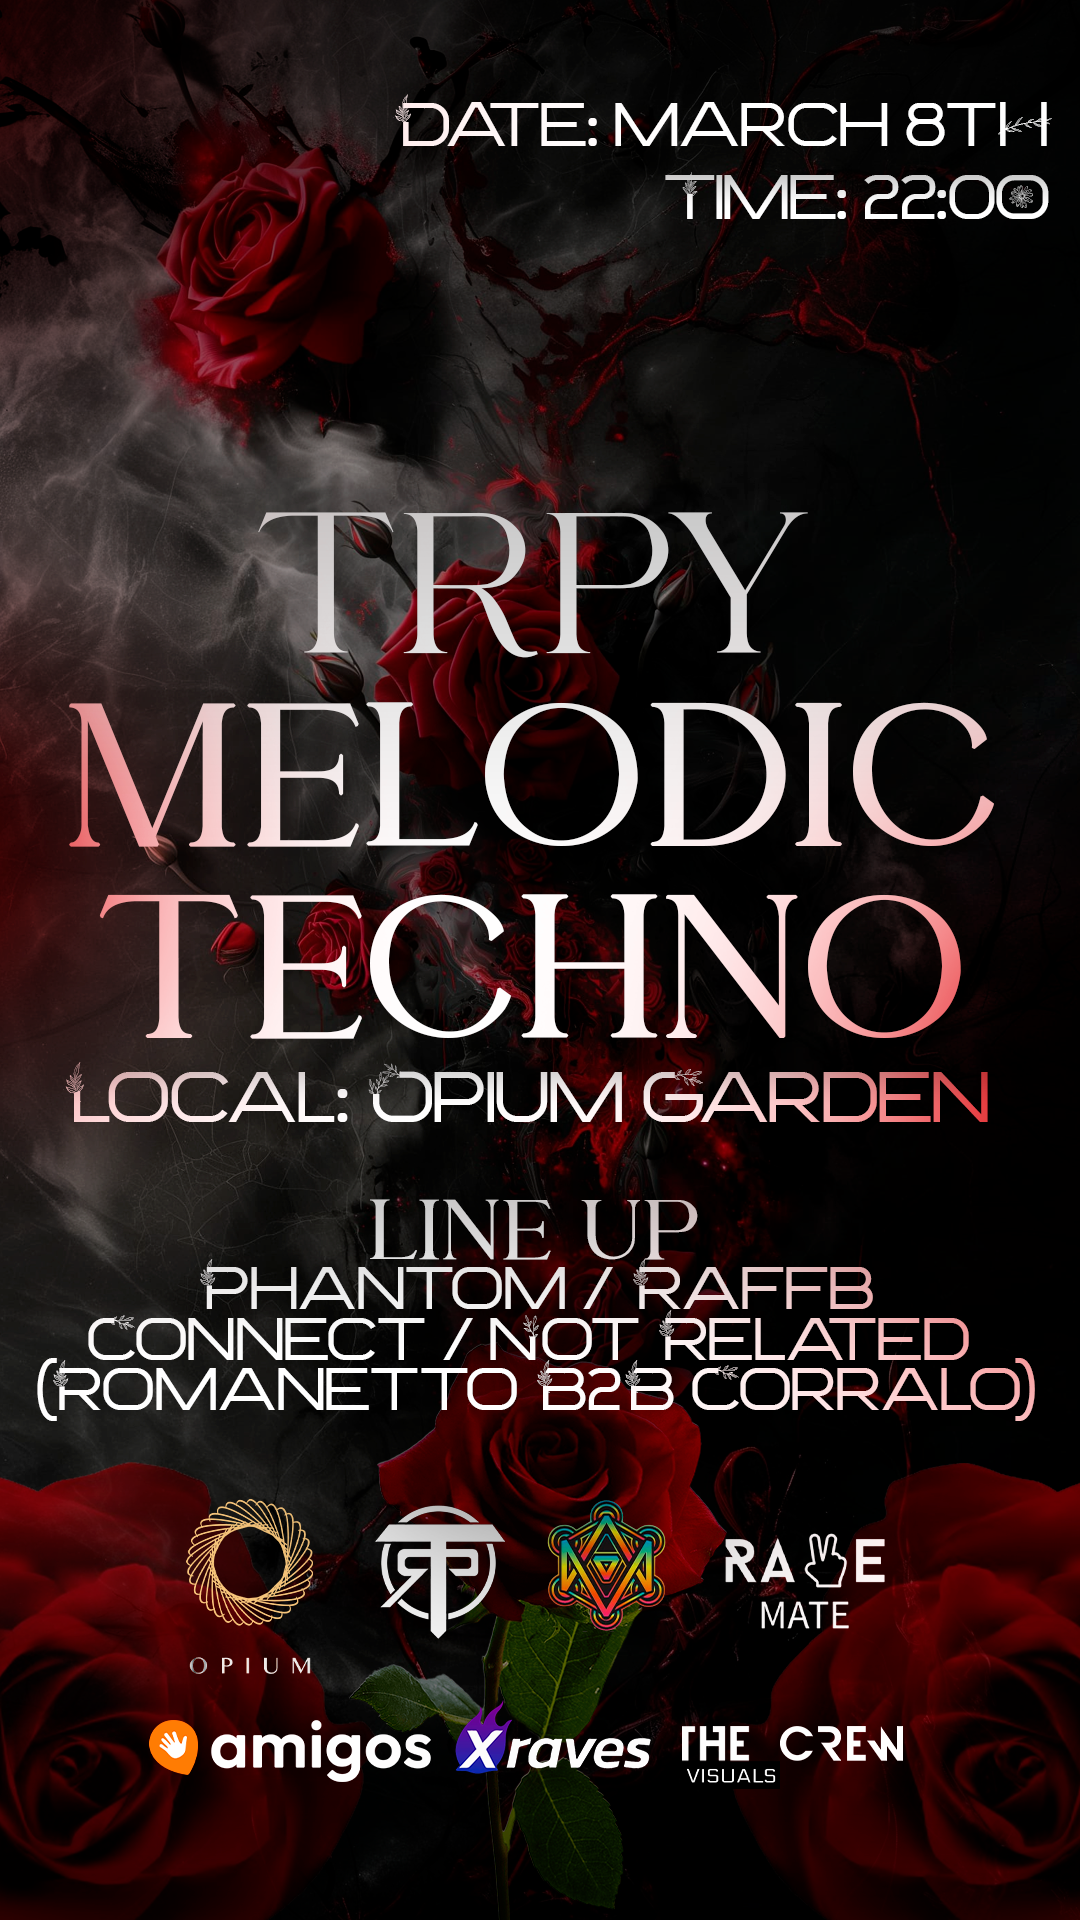 TRPY Melodic Techno - Opium Garden - by TRP - Página frontal